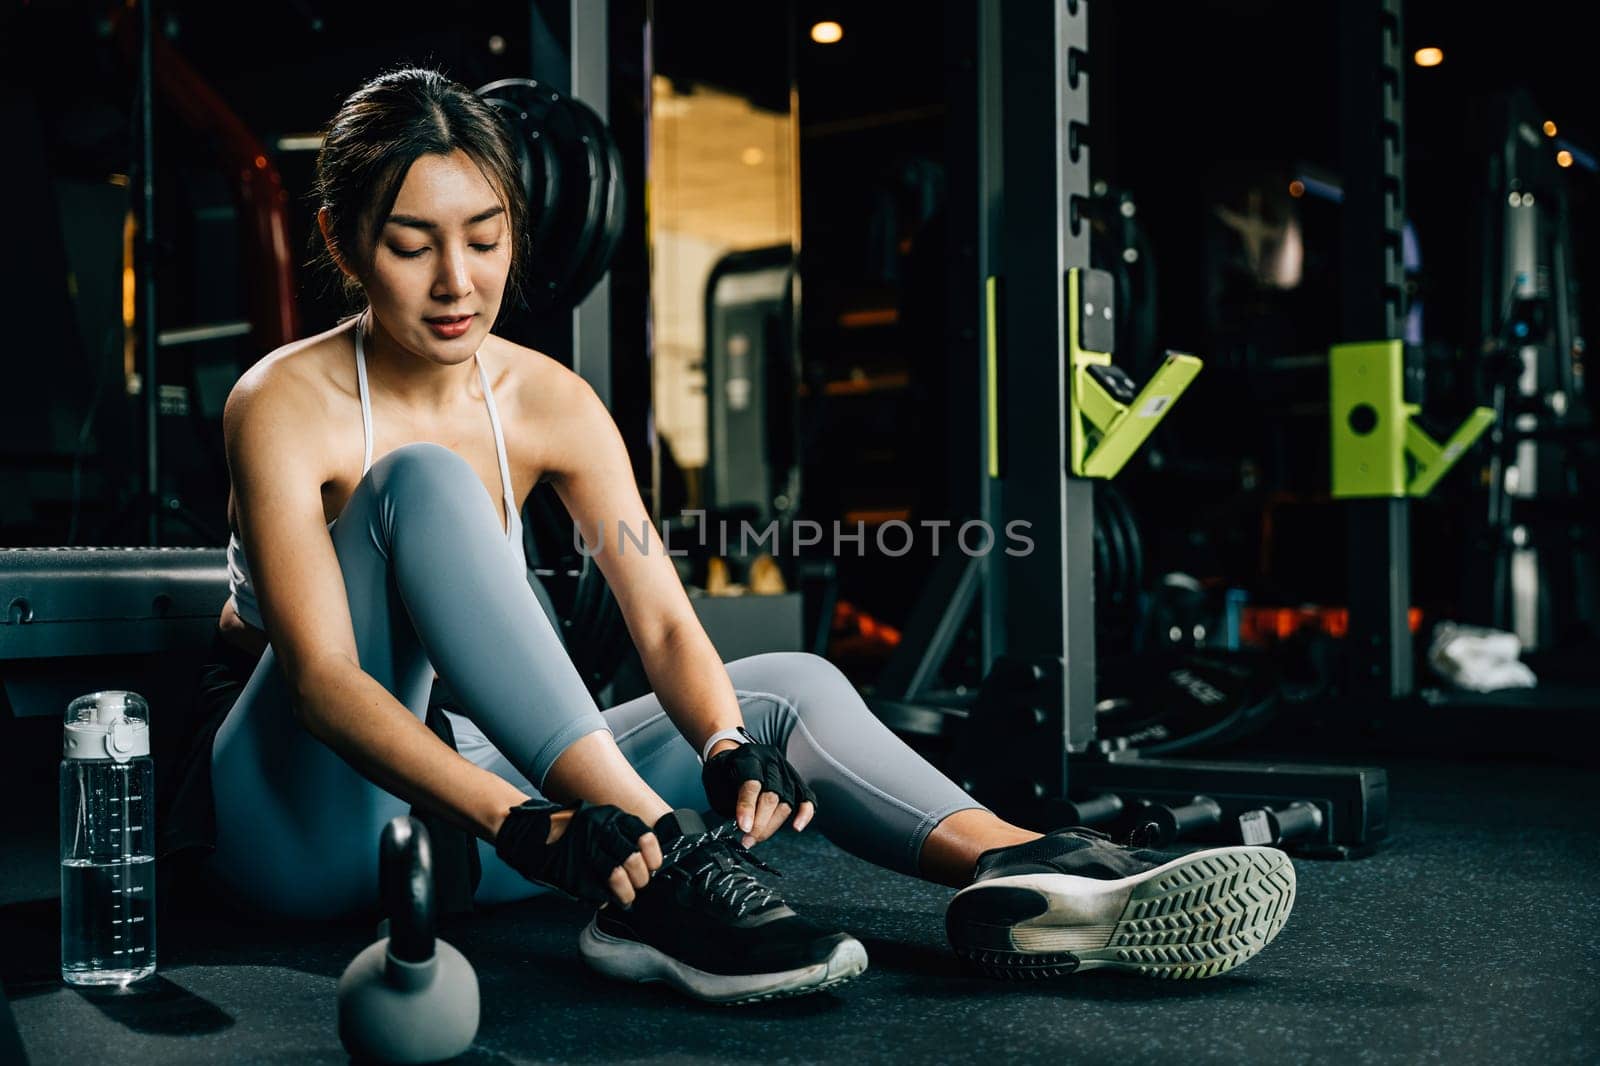 Young woman tying the shoelace of her running shoe on the gym floor. The shot captures her fit and toned legs, showcasing her dedication to fitness.